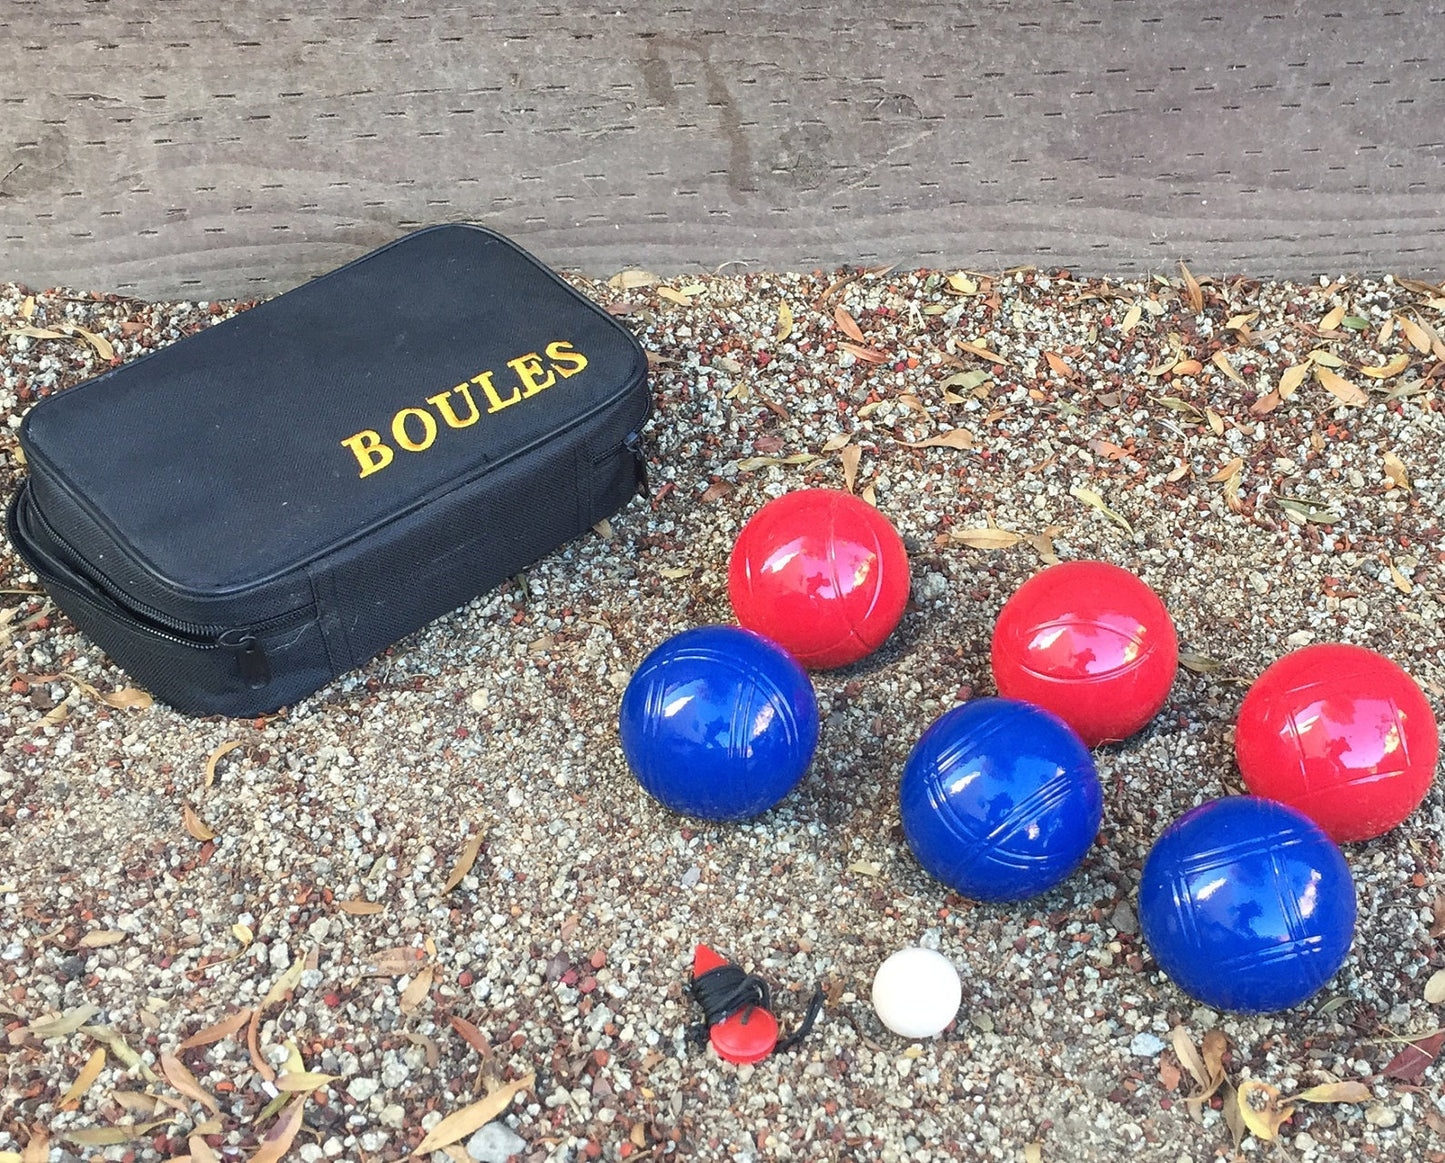 73mm Metal Boules Set with 6 Red and Blue Balls and Black Bag